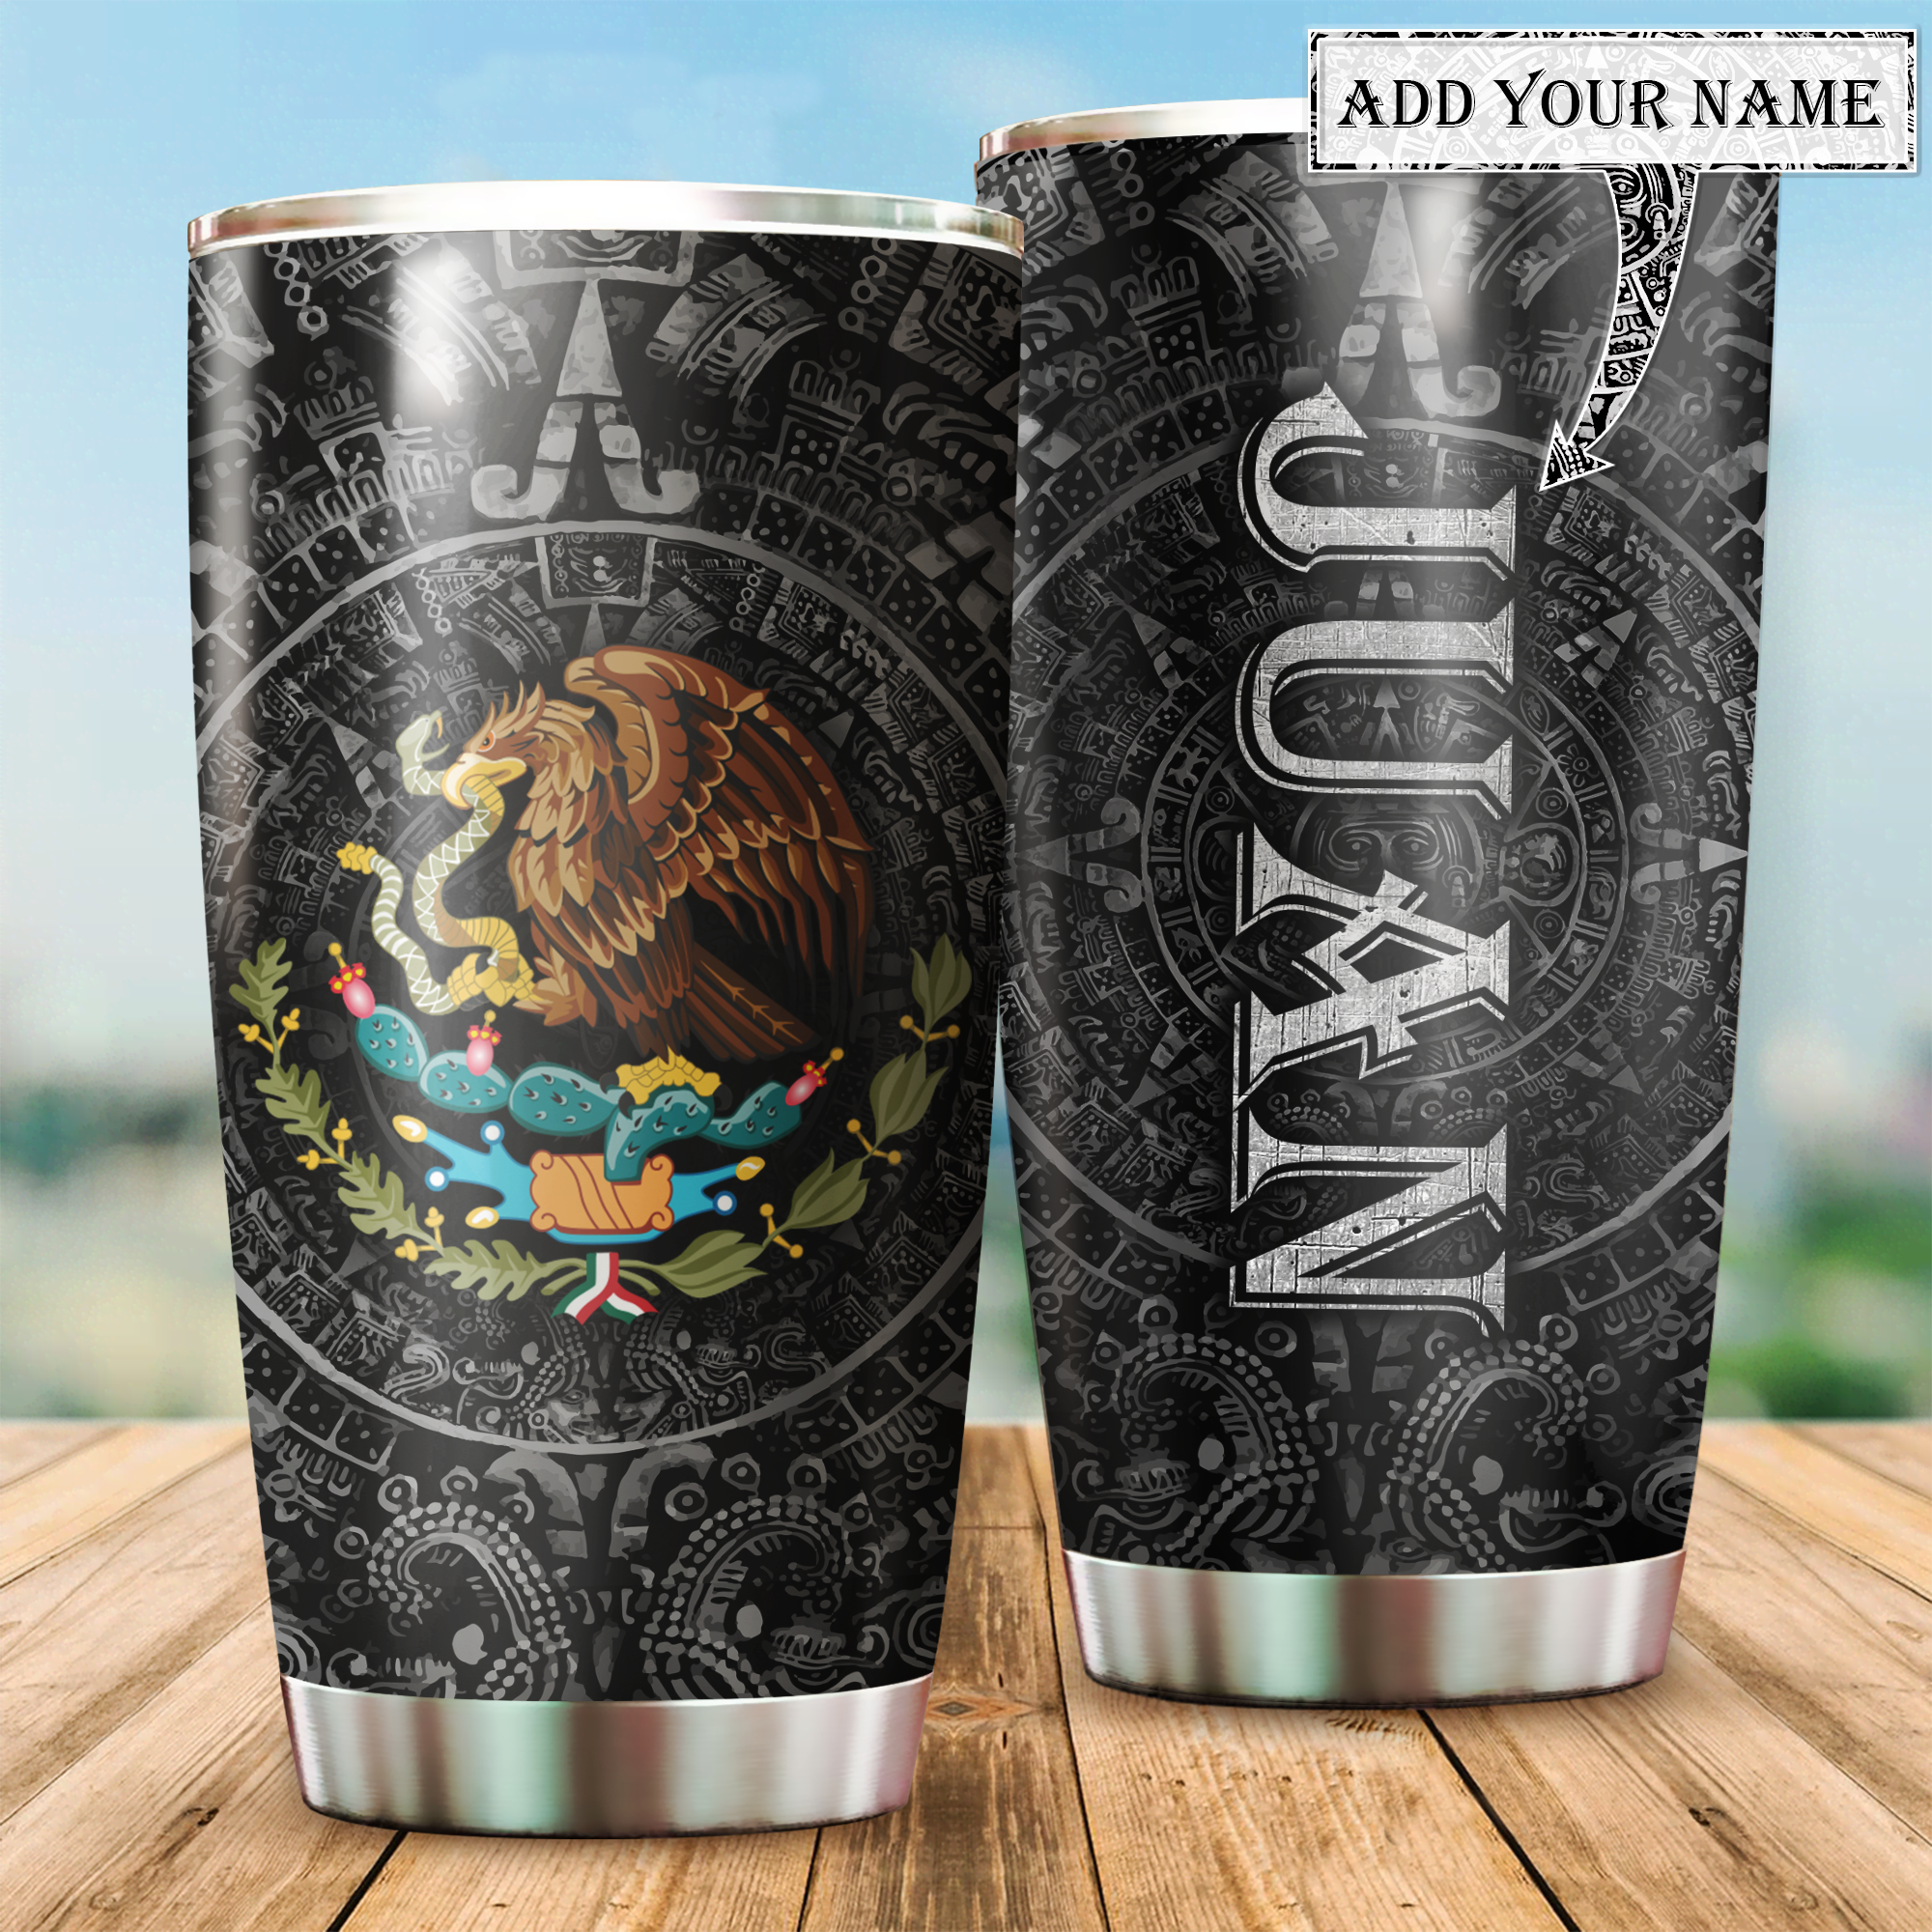 aztec-mexico-special-in-the-pattern-personalized-tumbler